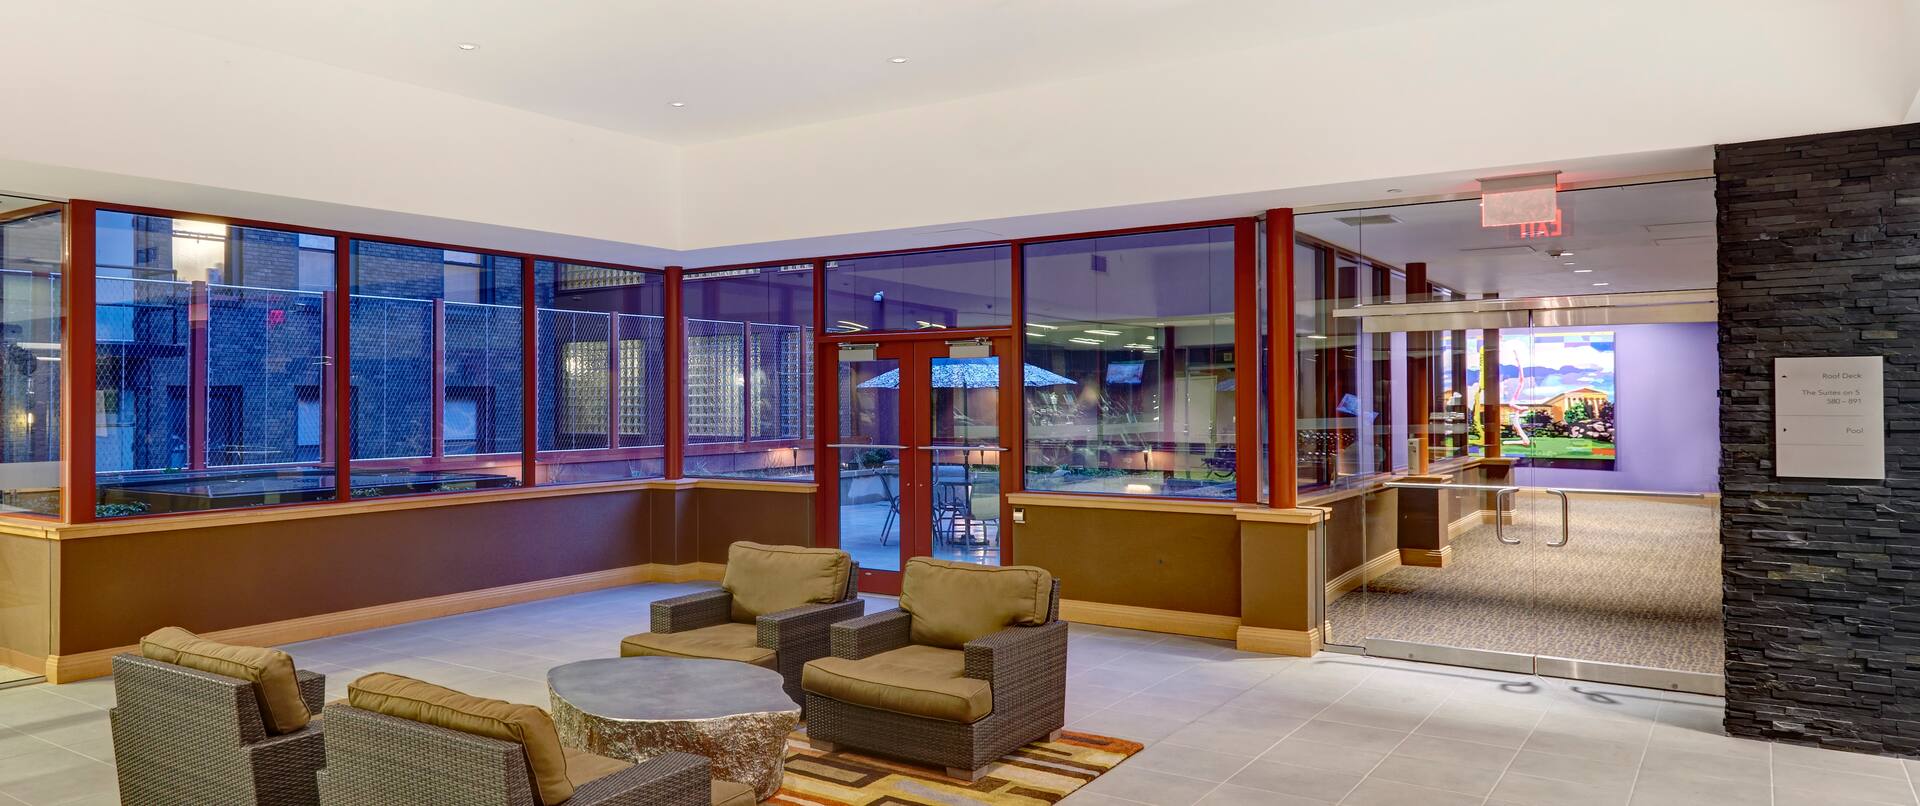 Soft Seating, Metallic Table, and Large Windows With Patio View at Sunset in Suites on 5 Lobby